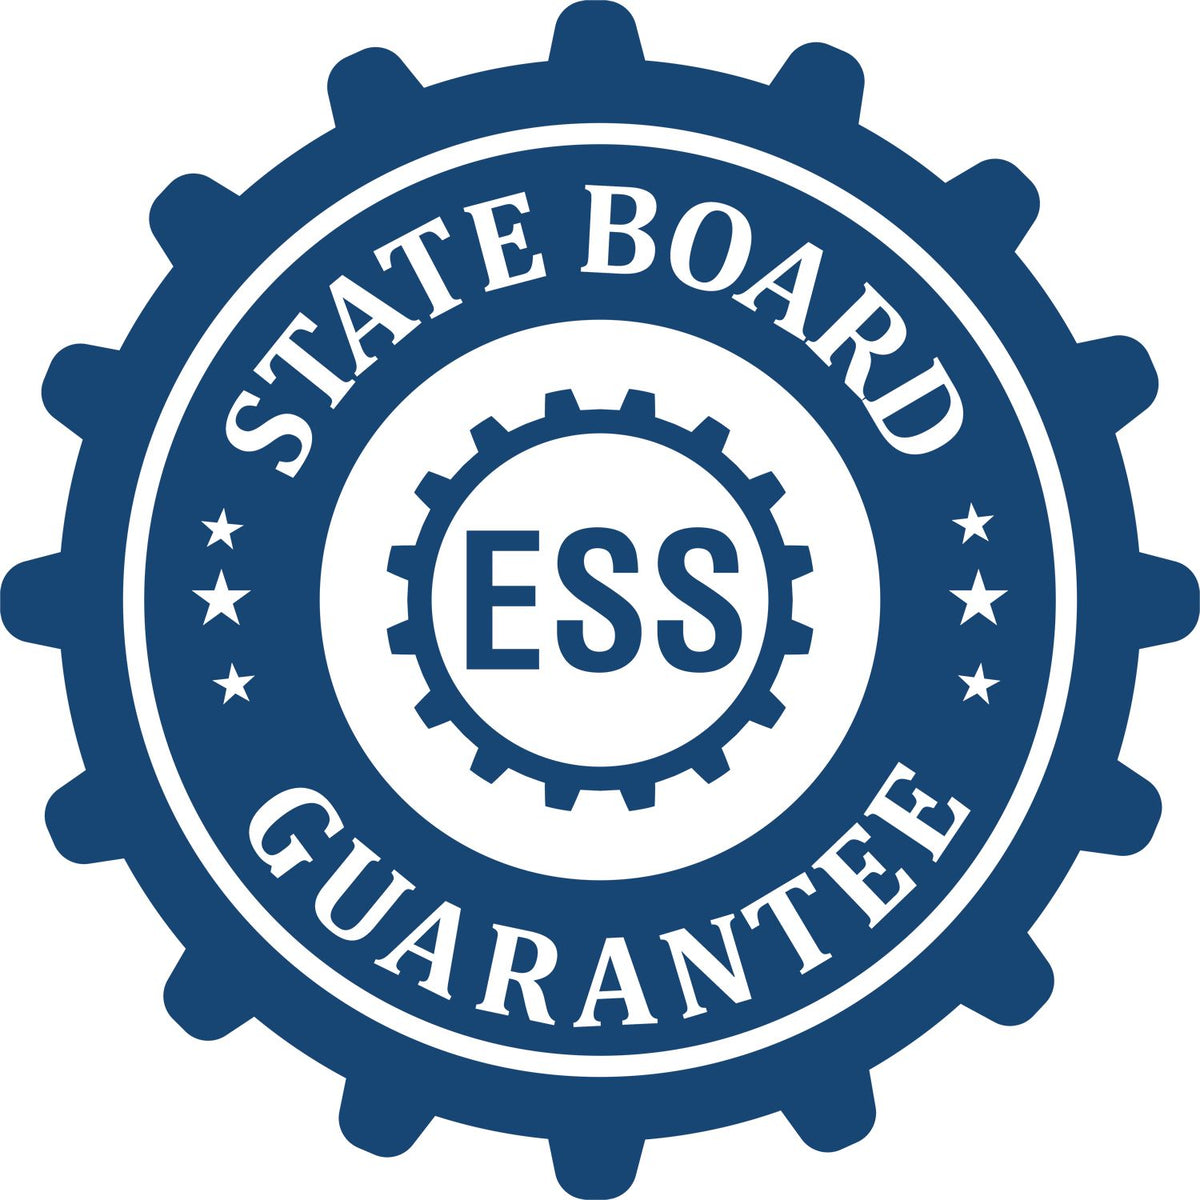 An emblem in a gear shape illustrating a state board guarantee for the Handheld Nebraska Land Surveyor Seal product.